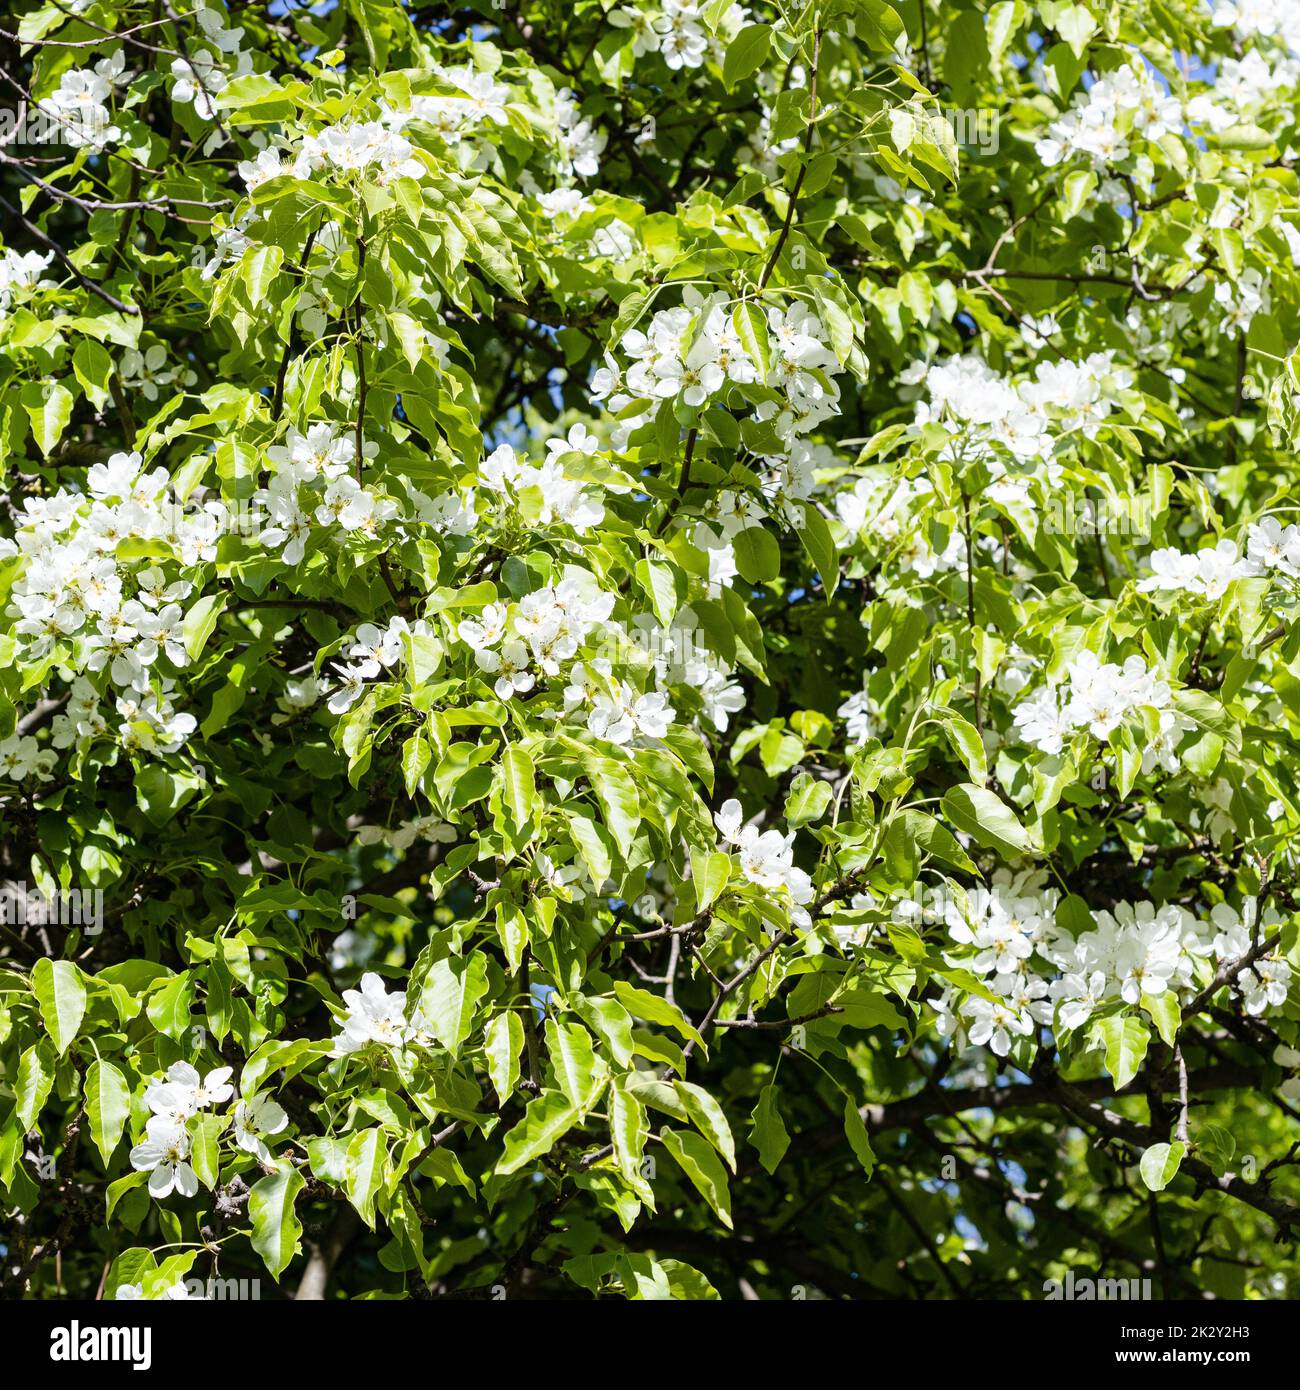 green leaves and white blossoms of pear tree Stock Photo